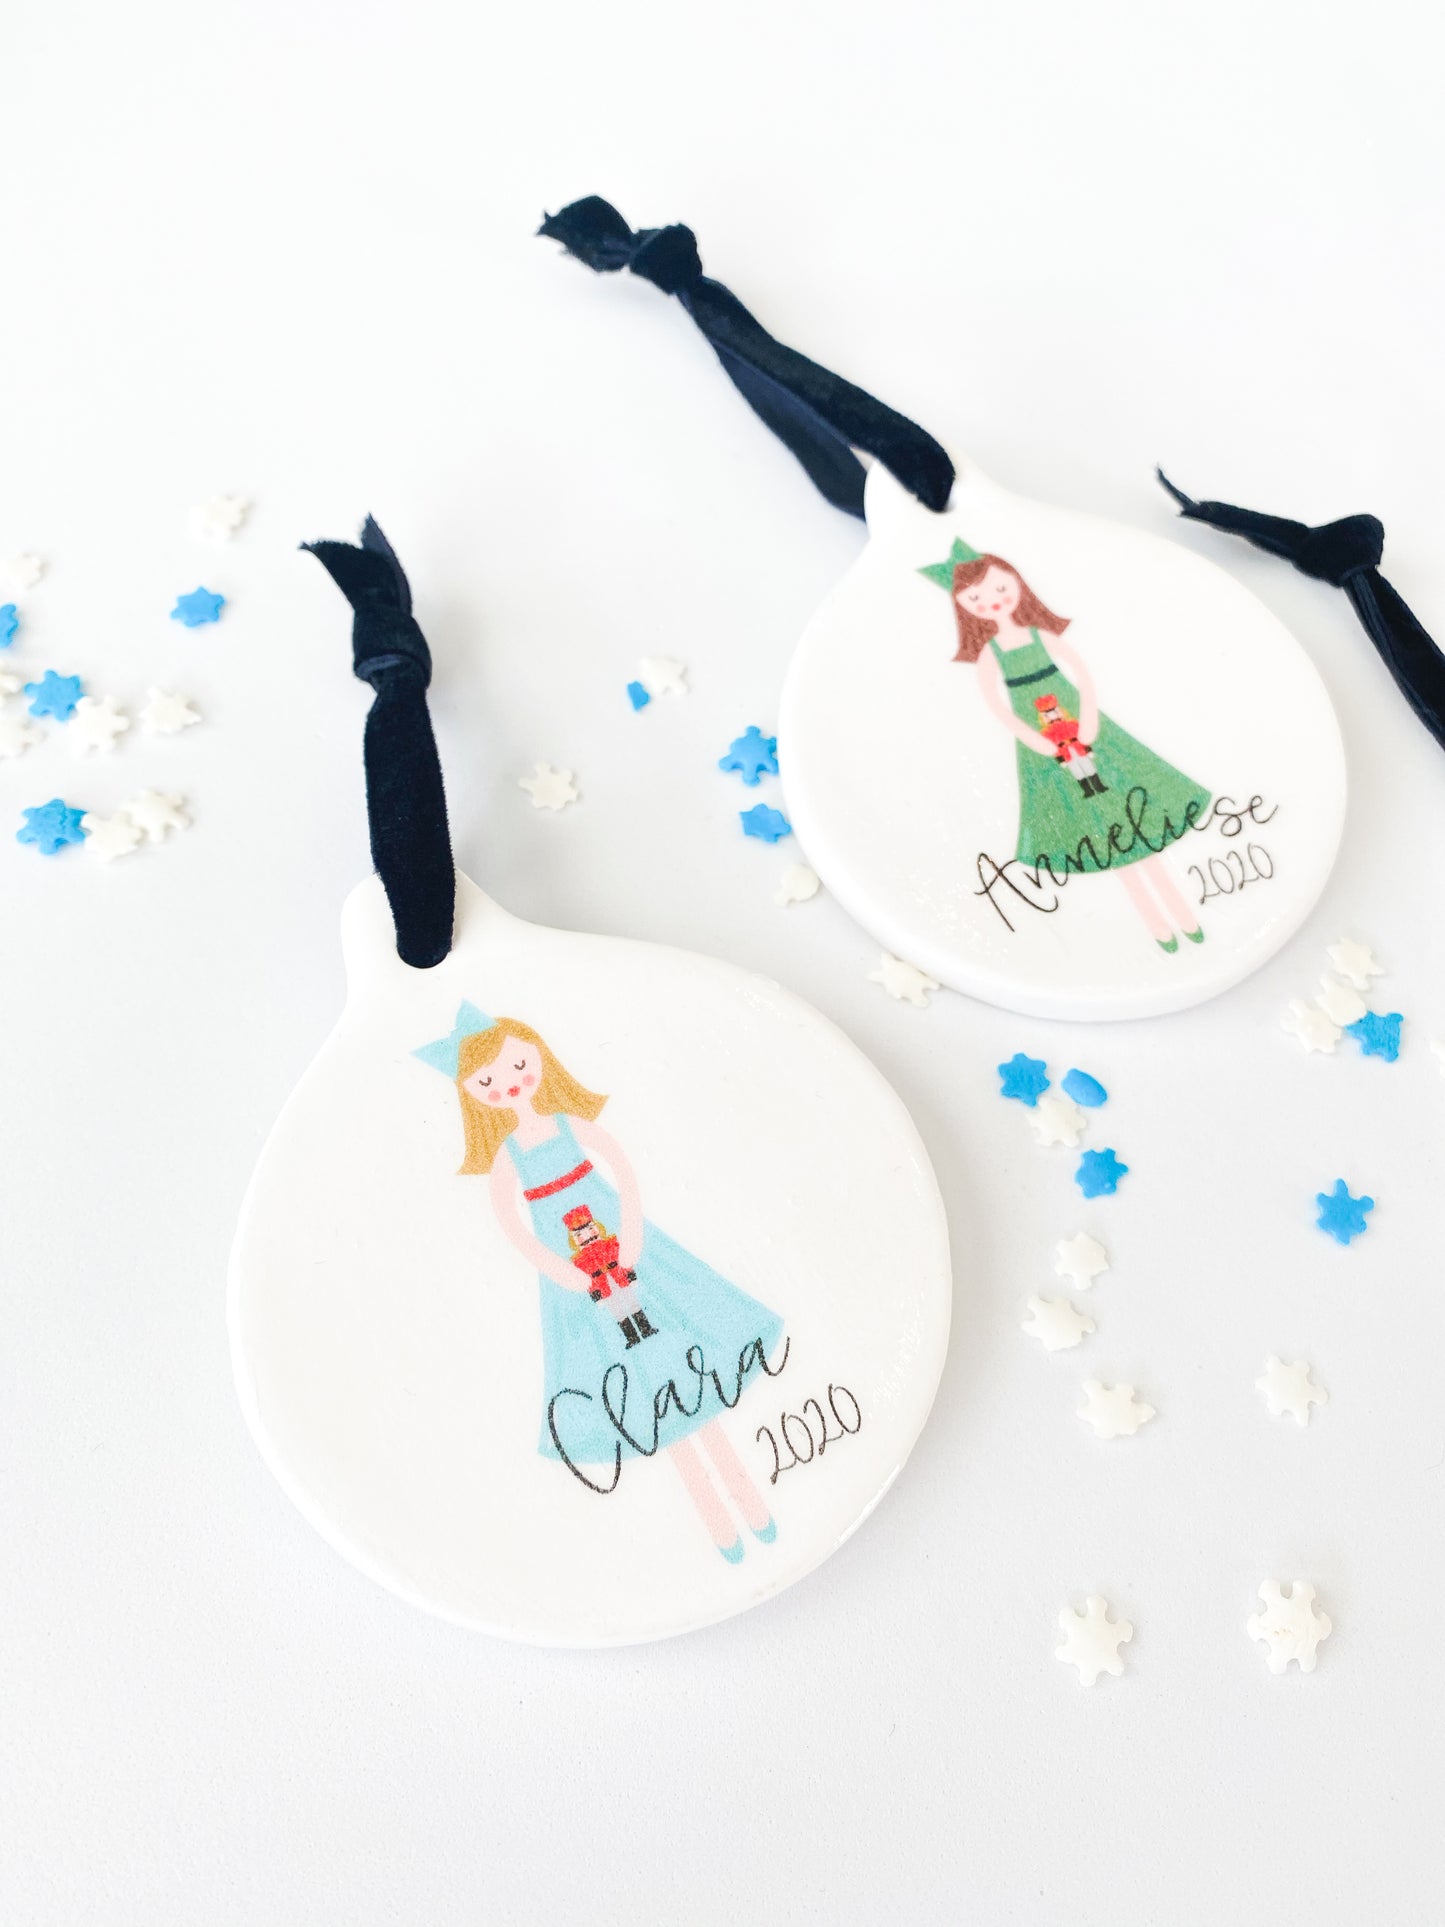 CUSTOM PARTY GIRL PERSONALIZED ORNAMENT